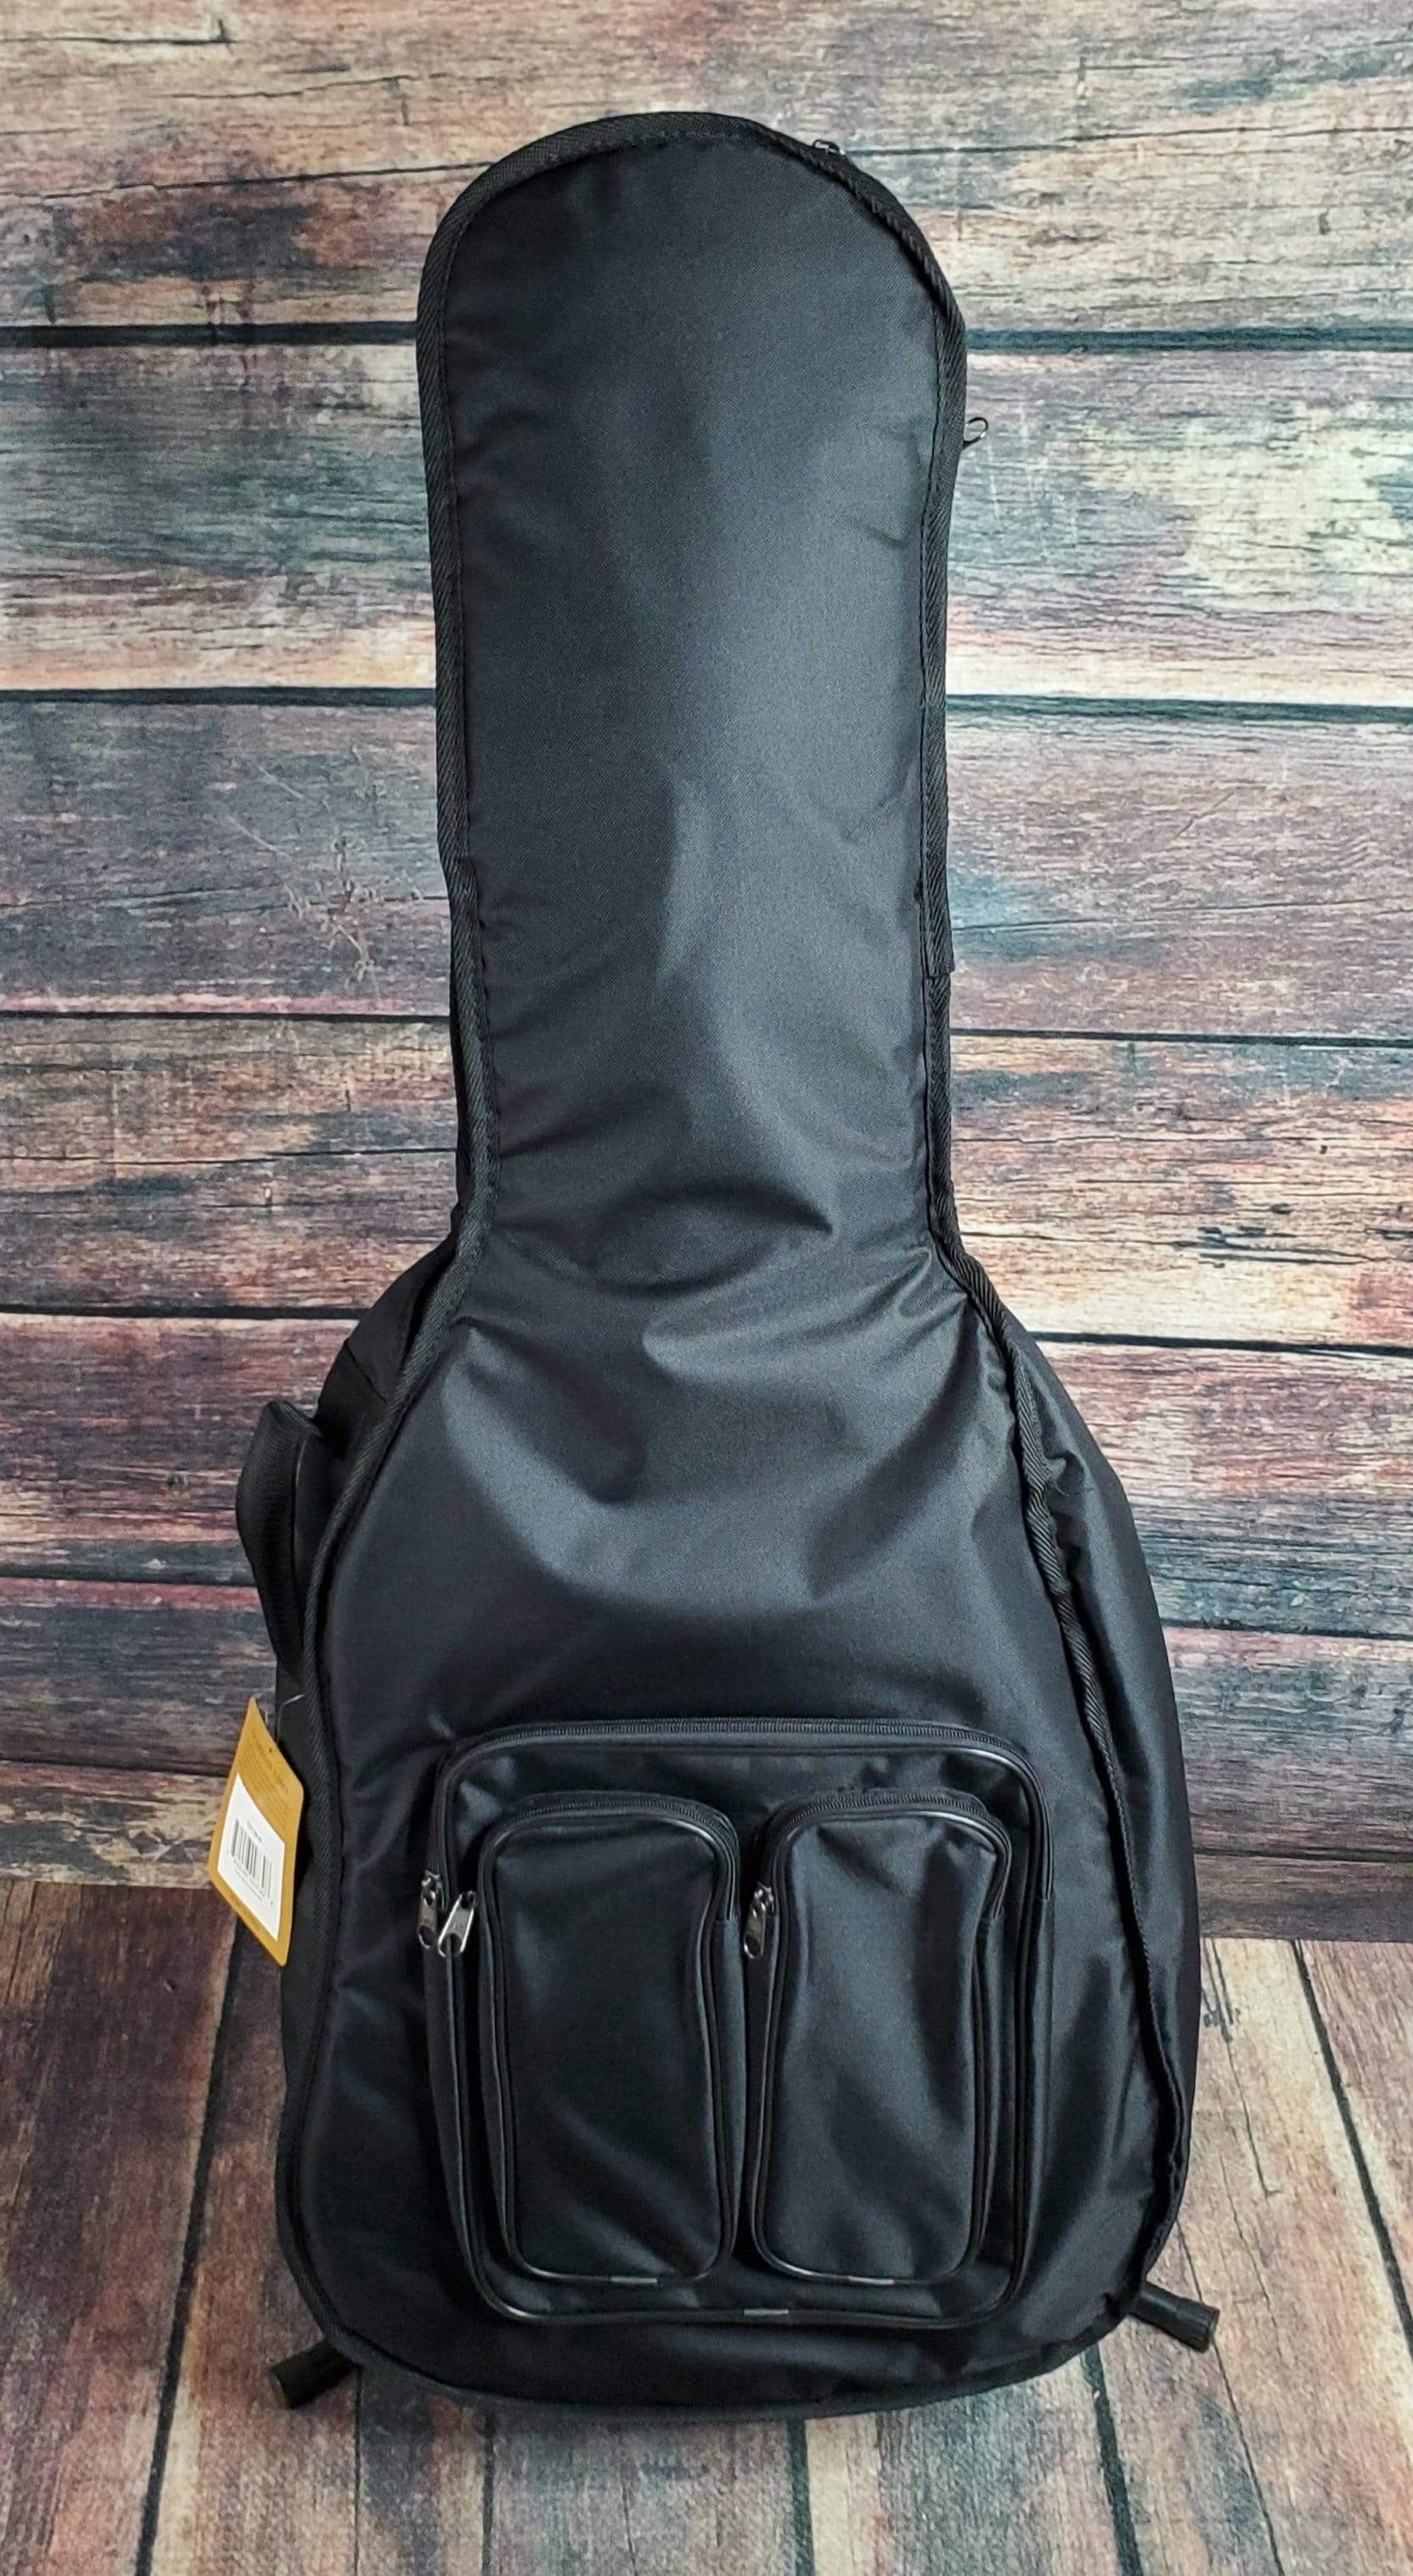 GIG Master Acoustic Guitar Bag Heavy Foam Padded for 38, 39, 40, 41 Inches  Guitar Like - Fender, Yamaha, Cort, & Givson Brands with Free Guitar Bag  Accessory : Amazon.in: Musical Instruments